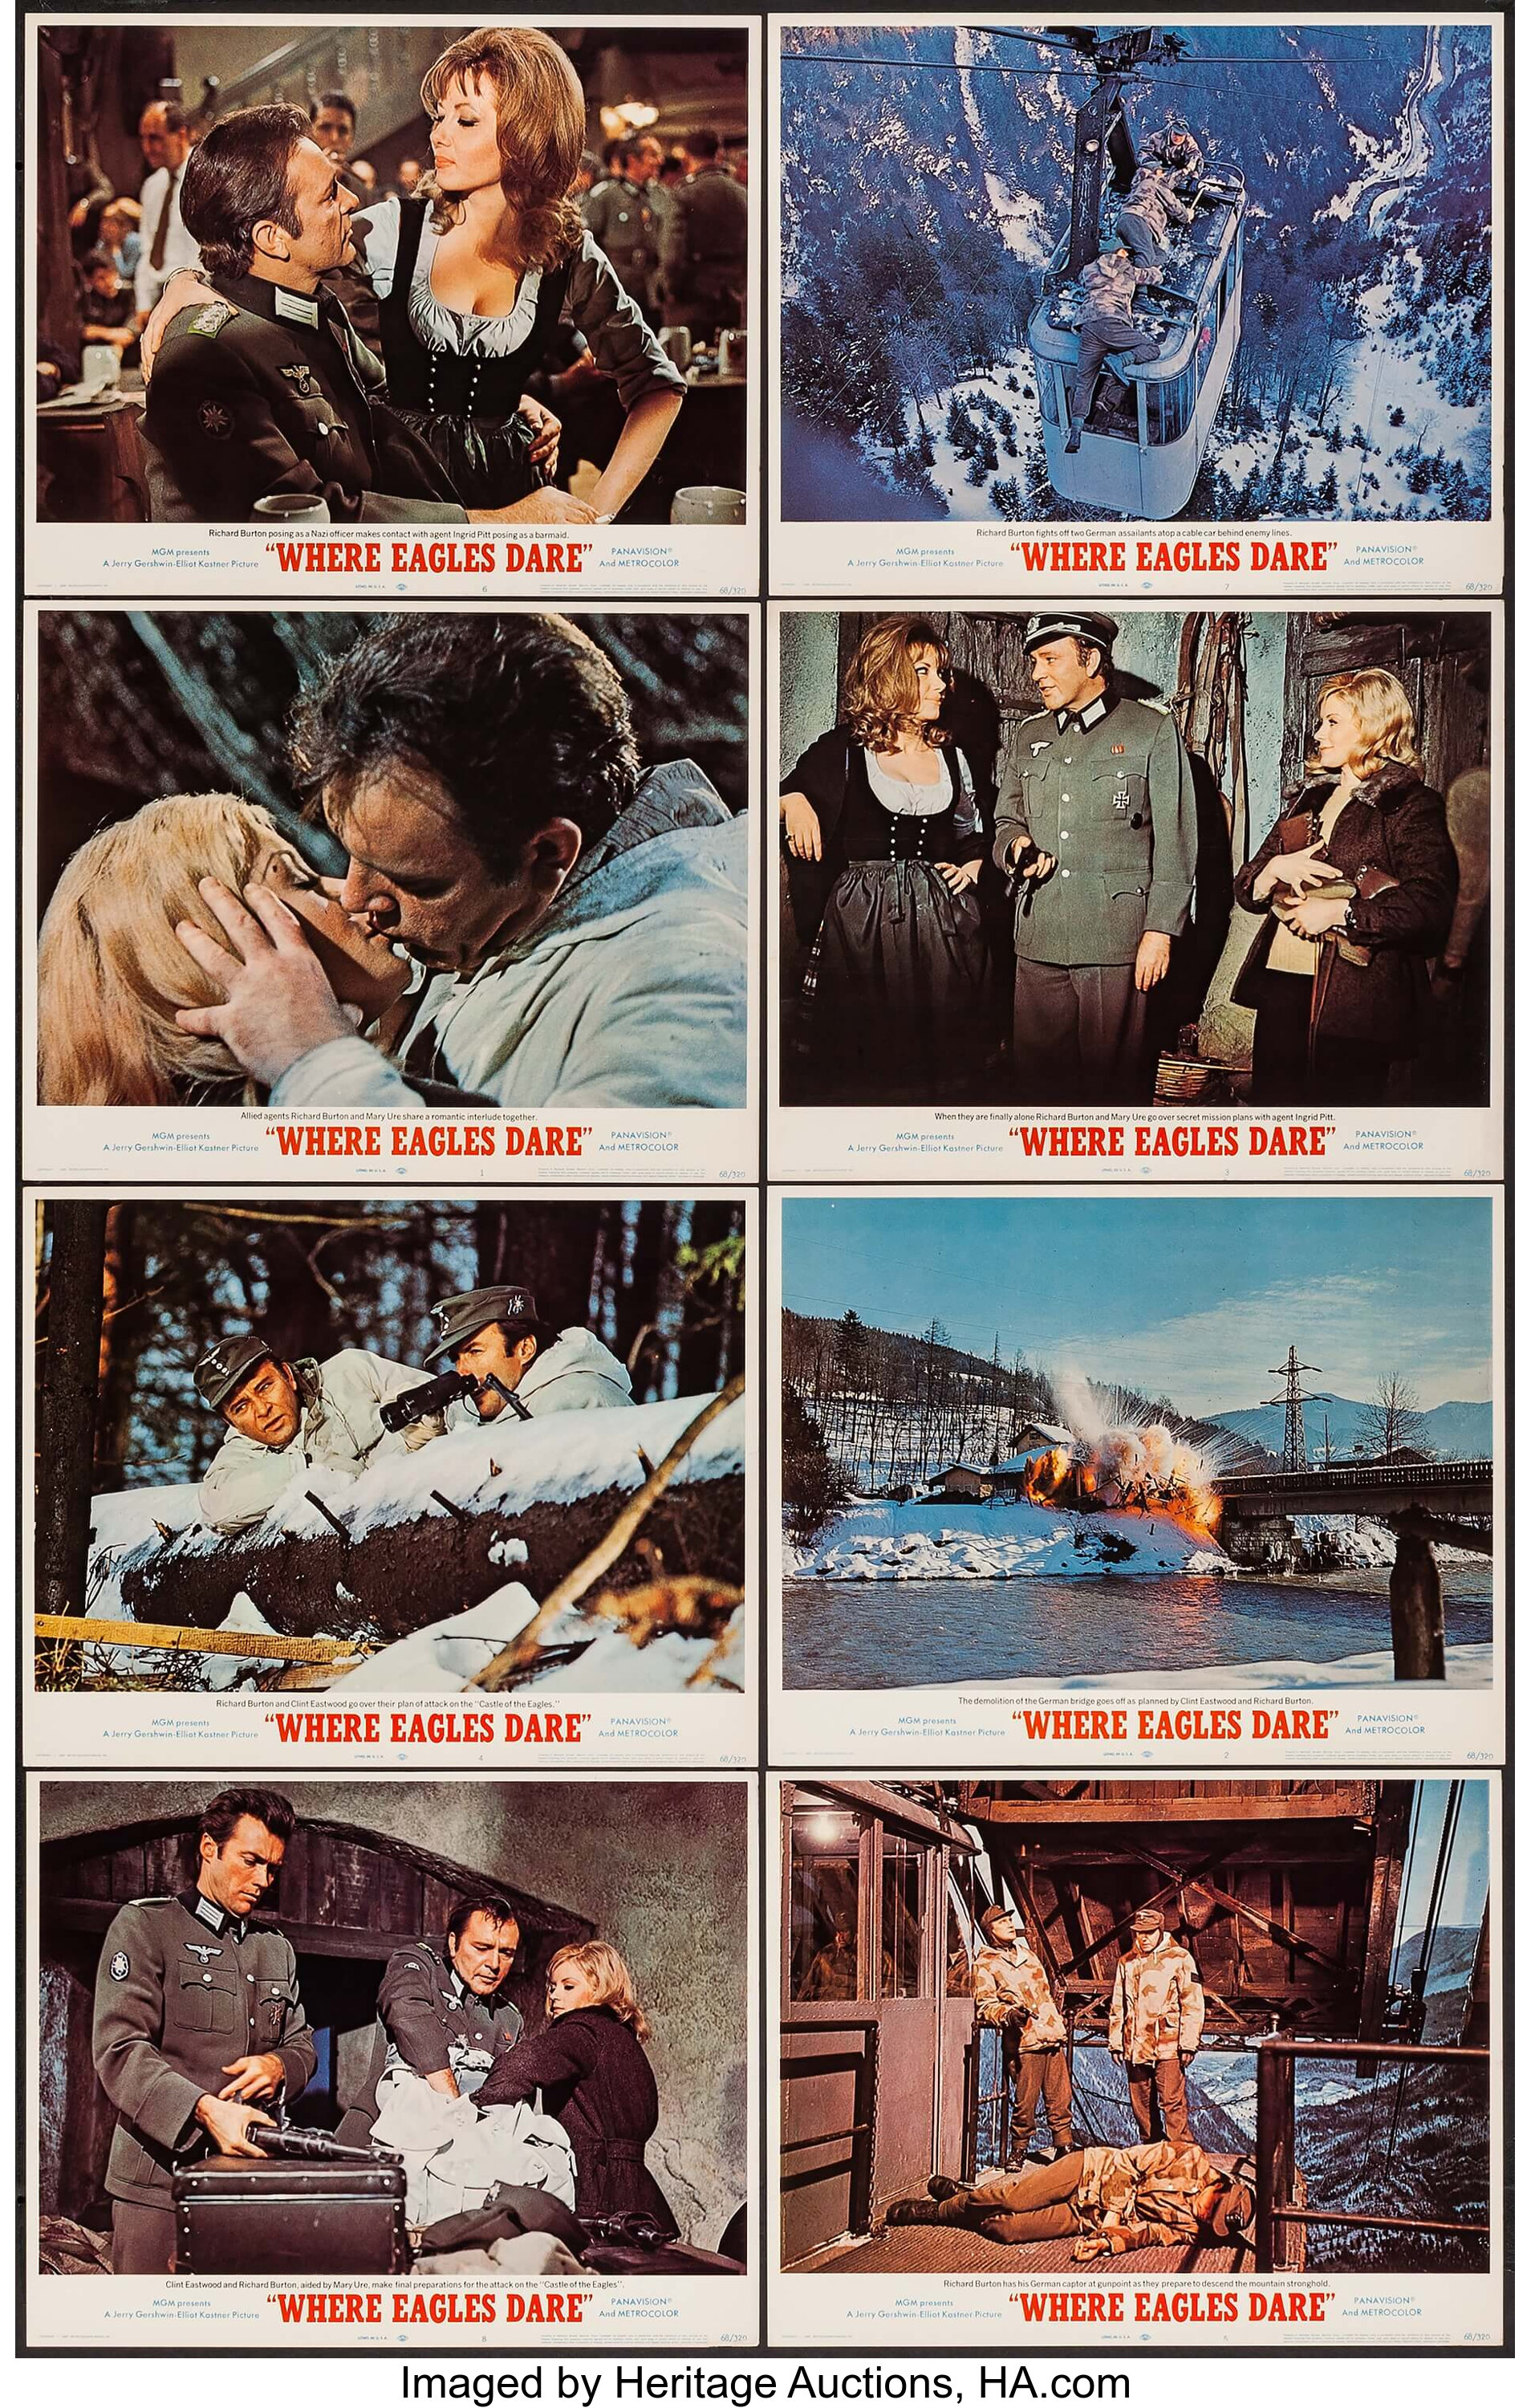 Where Eagles Dare Mgm 1968 Lobby Card Set Of 8 11 X 14 Lot 52479 Heritage Auctions